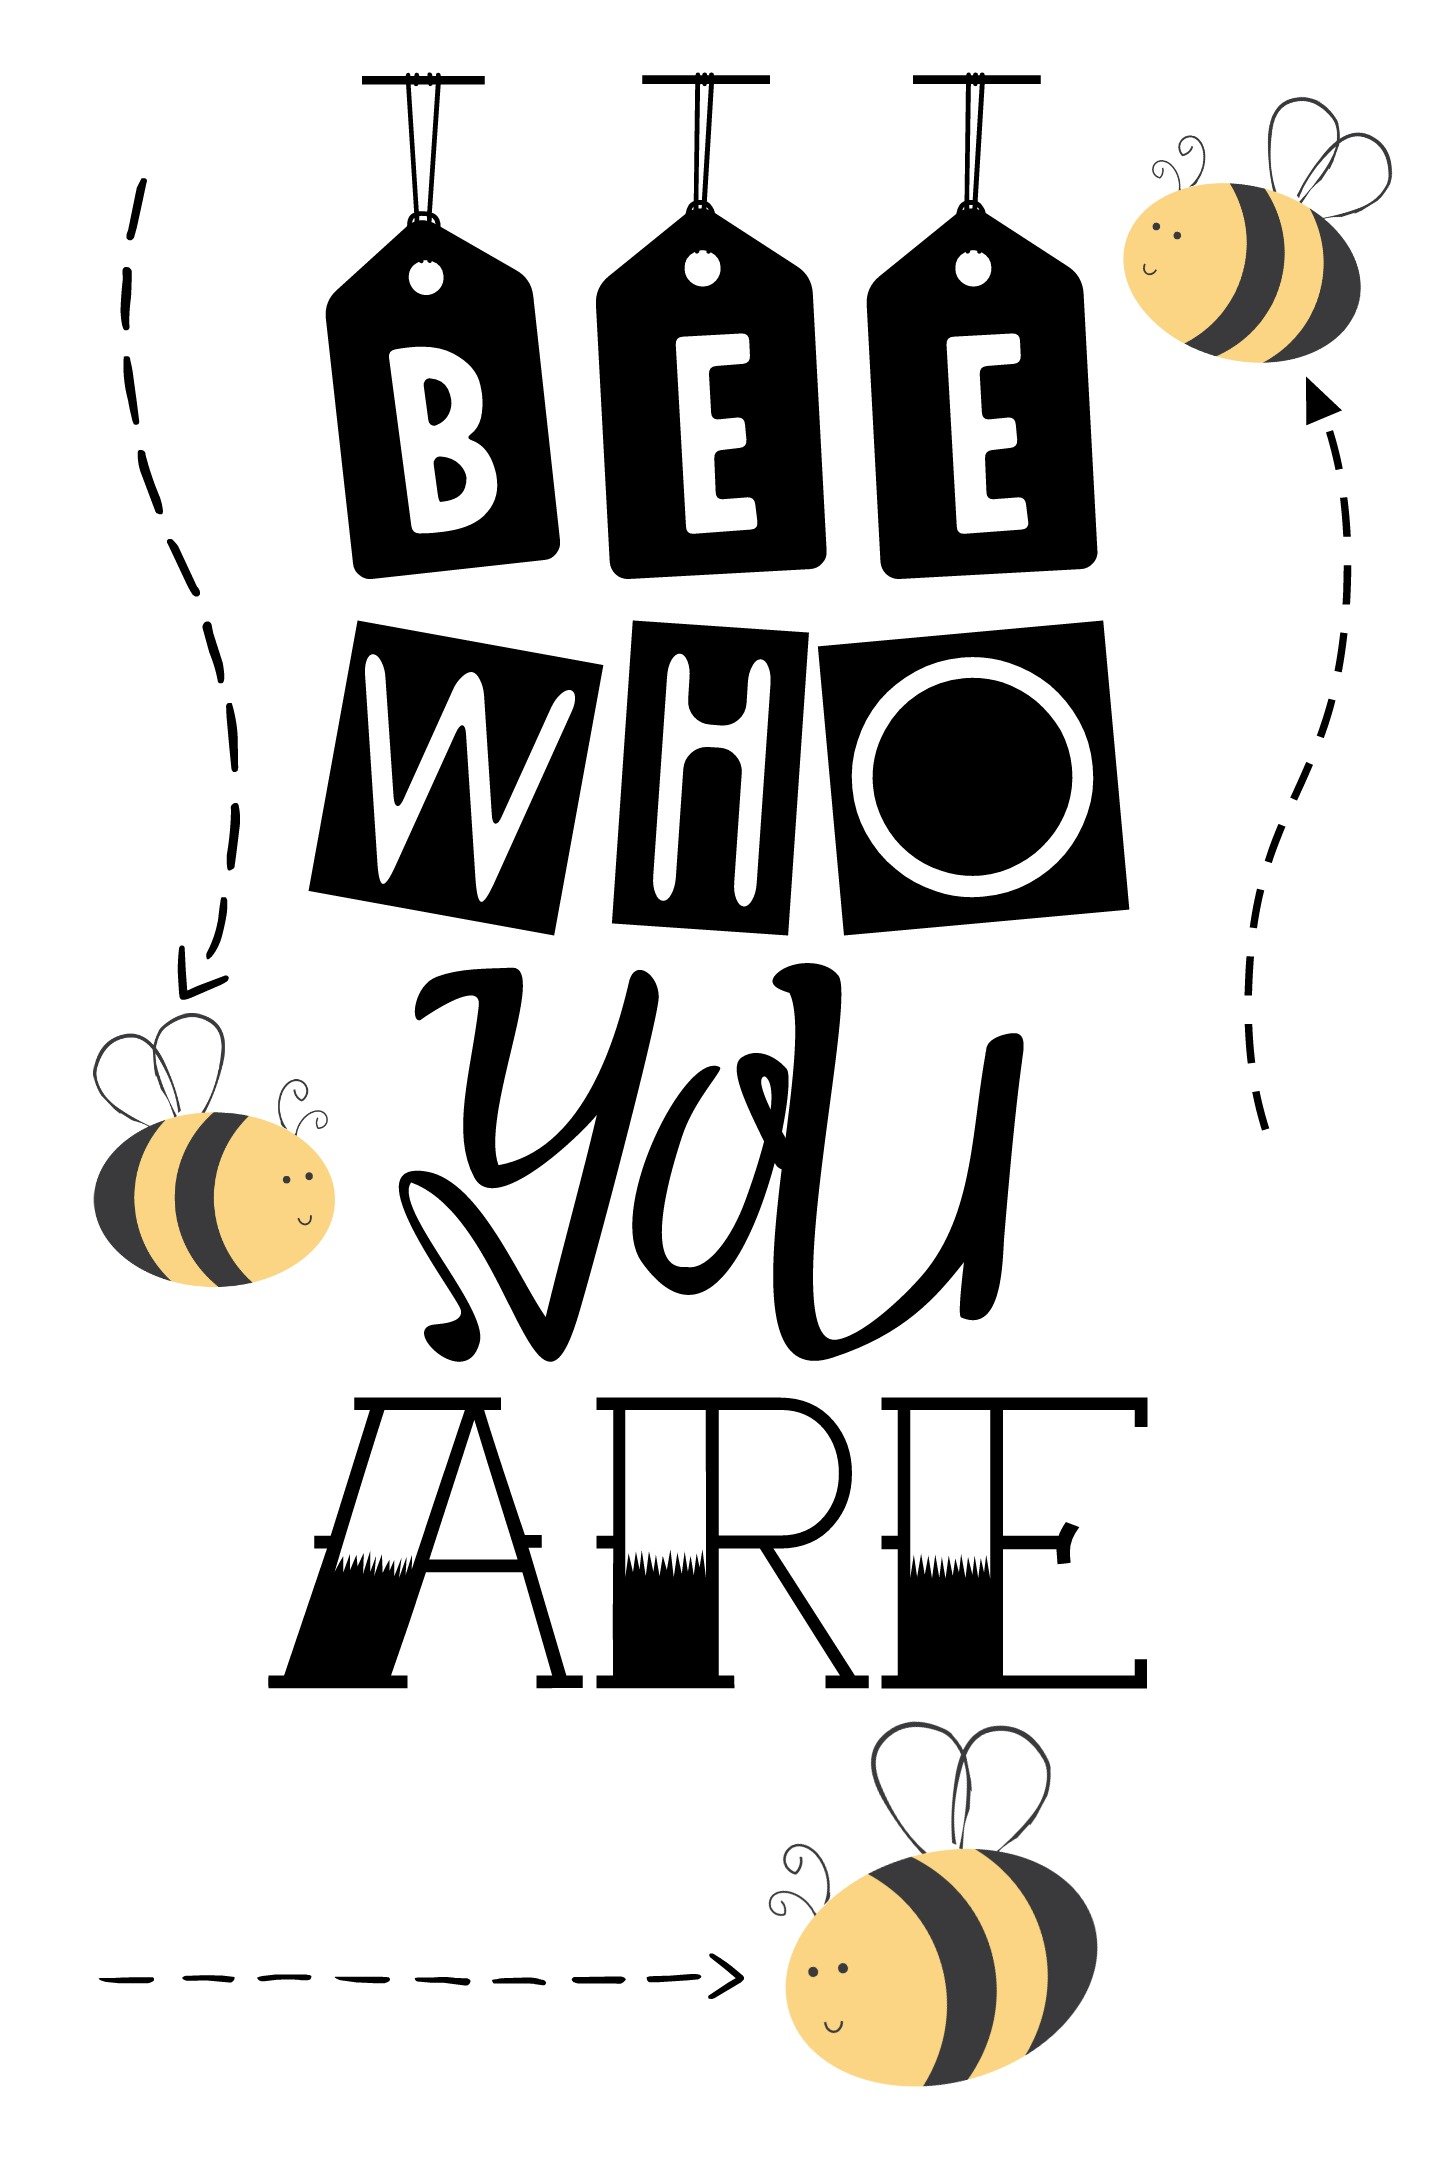 Bee who you are